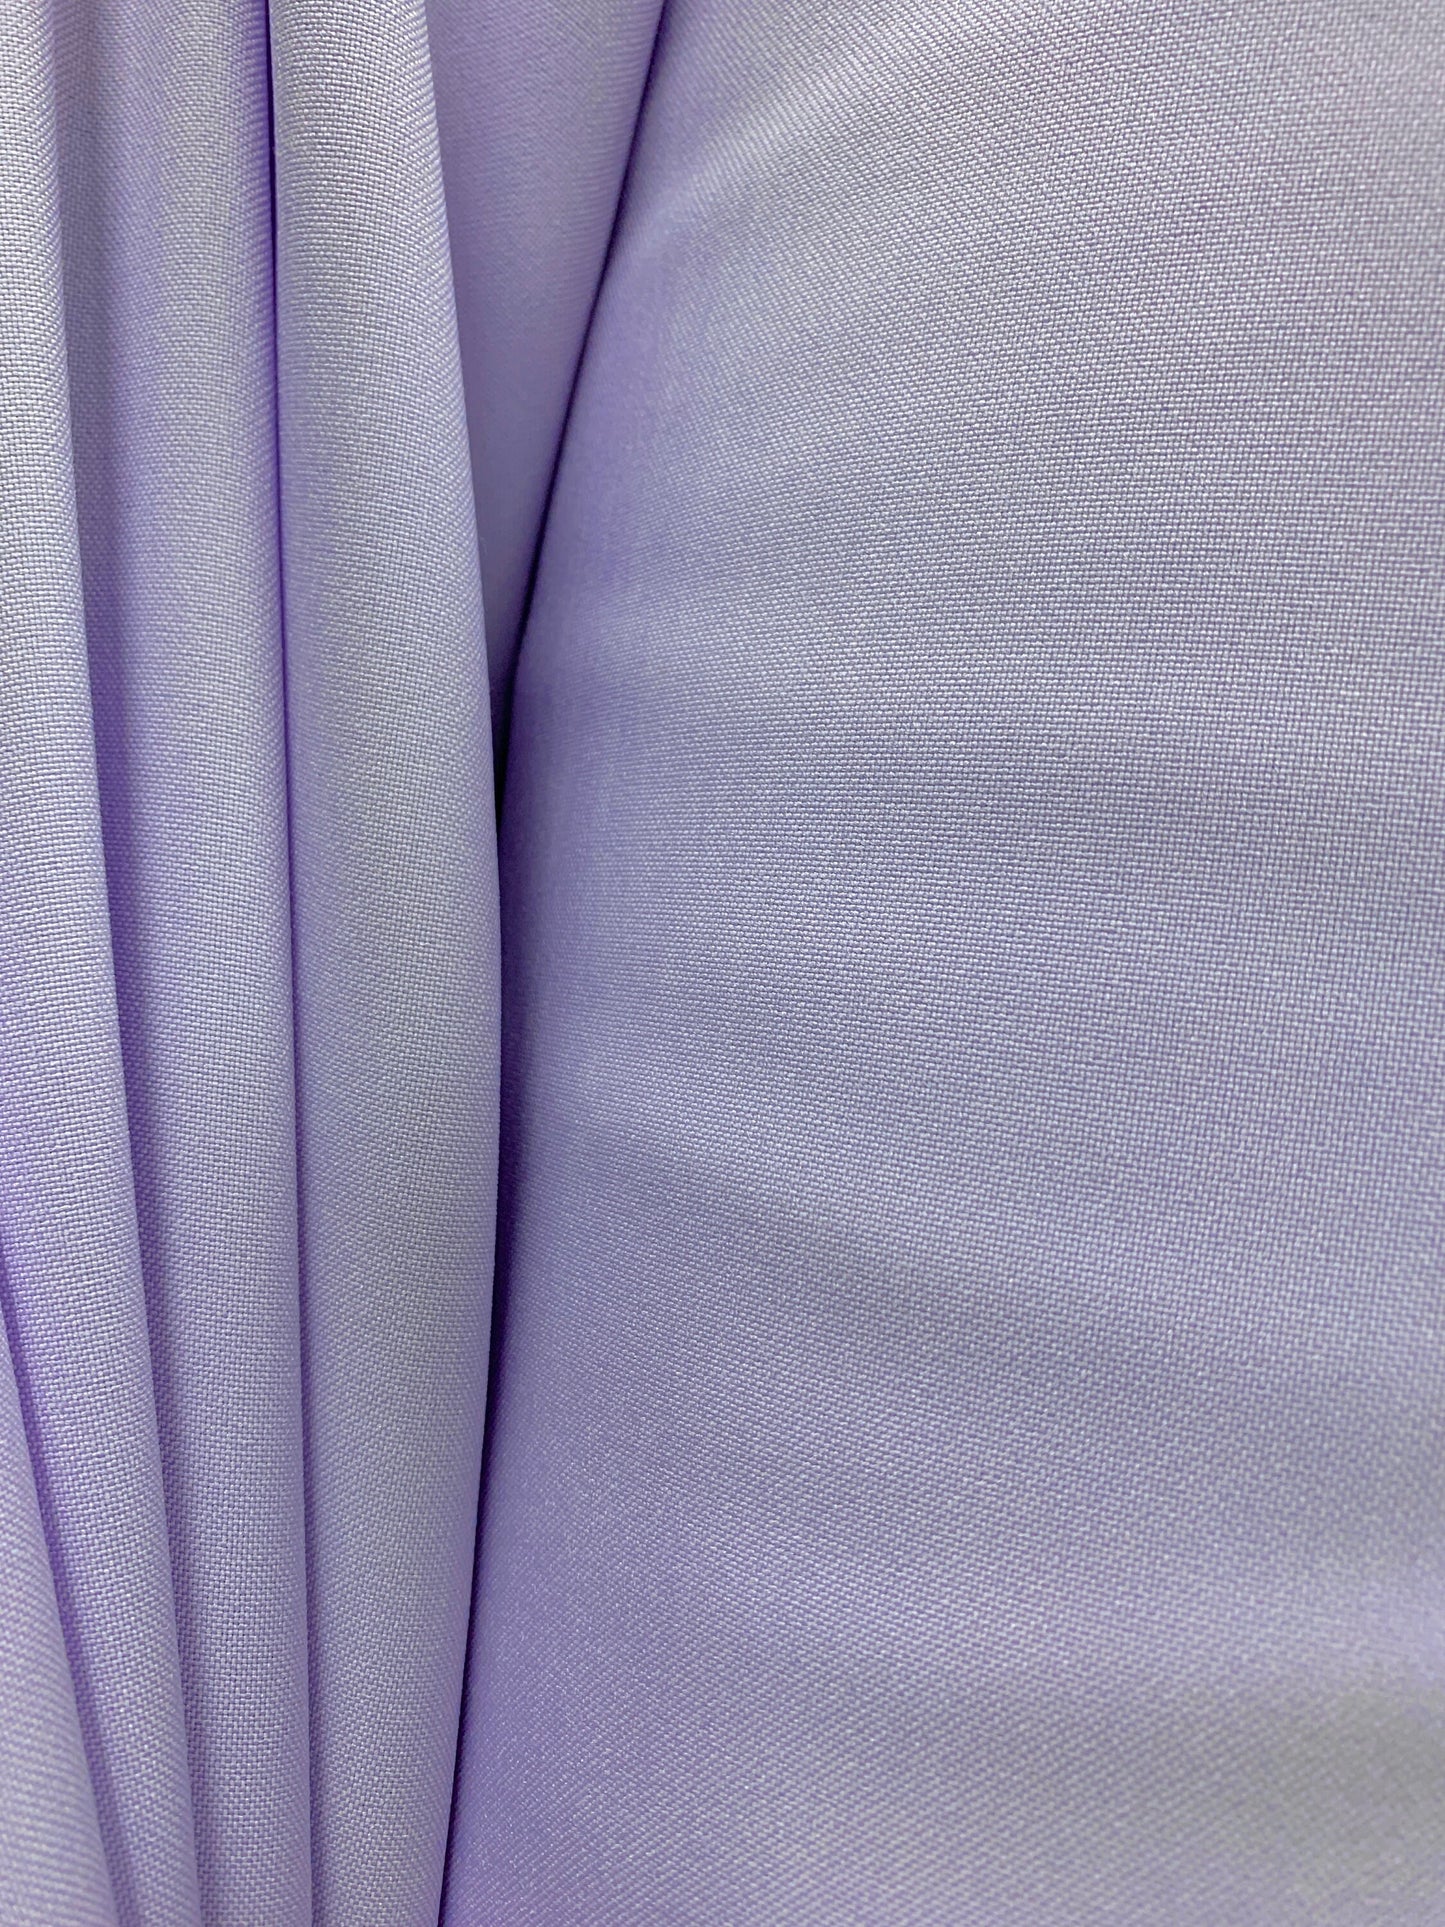 LAVENDER 100% Polyester Poplin Fabric (60 in.) Sold By The Yard